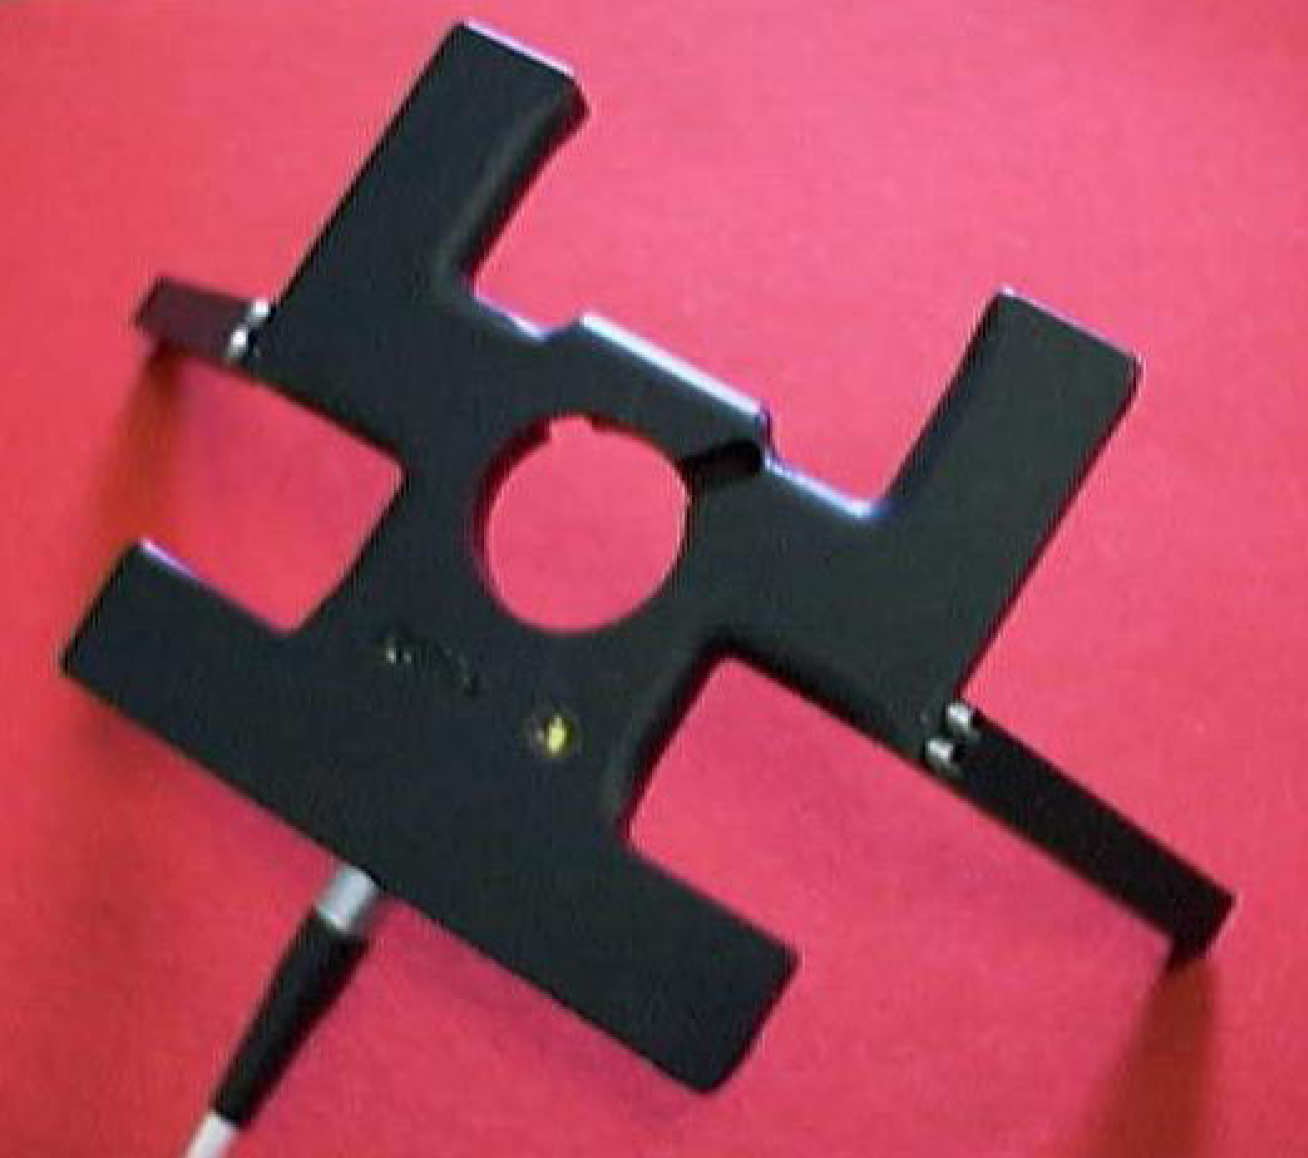 The operating room tracking probe for the resectoscope, manufactured by Traxtal Technologies